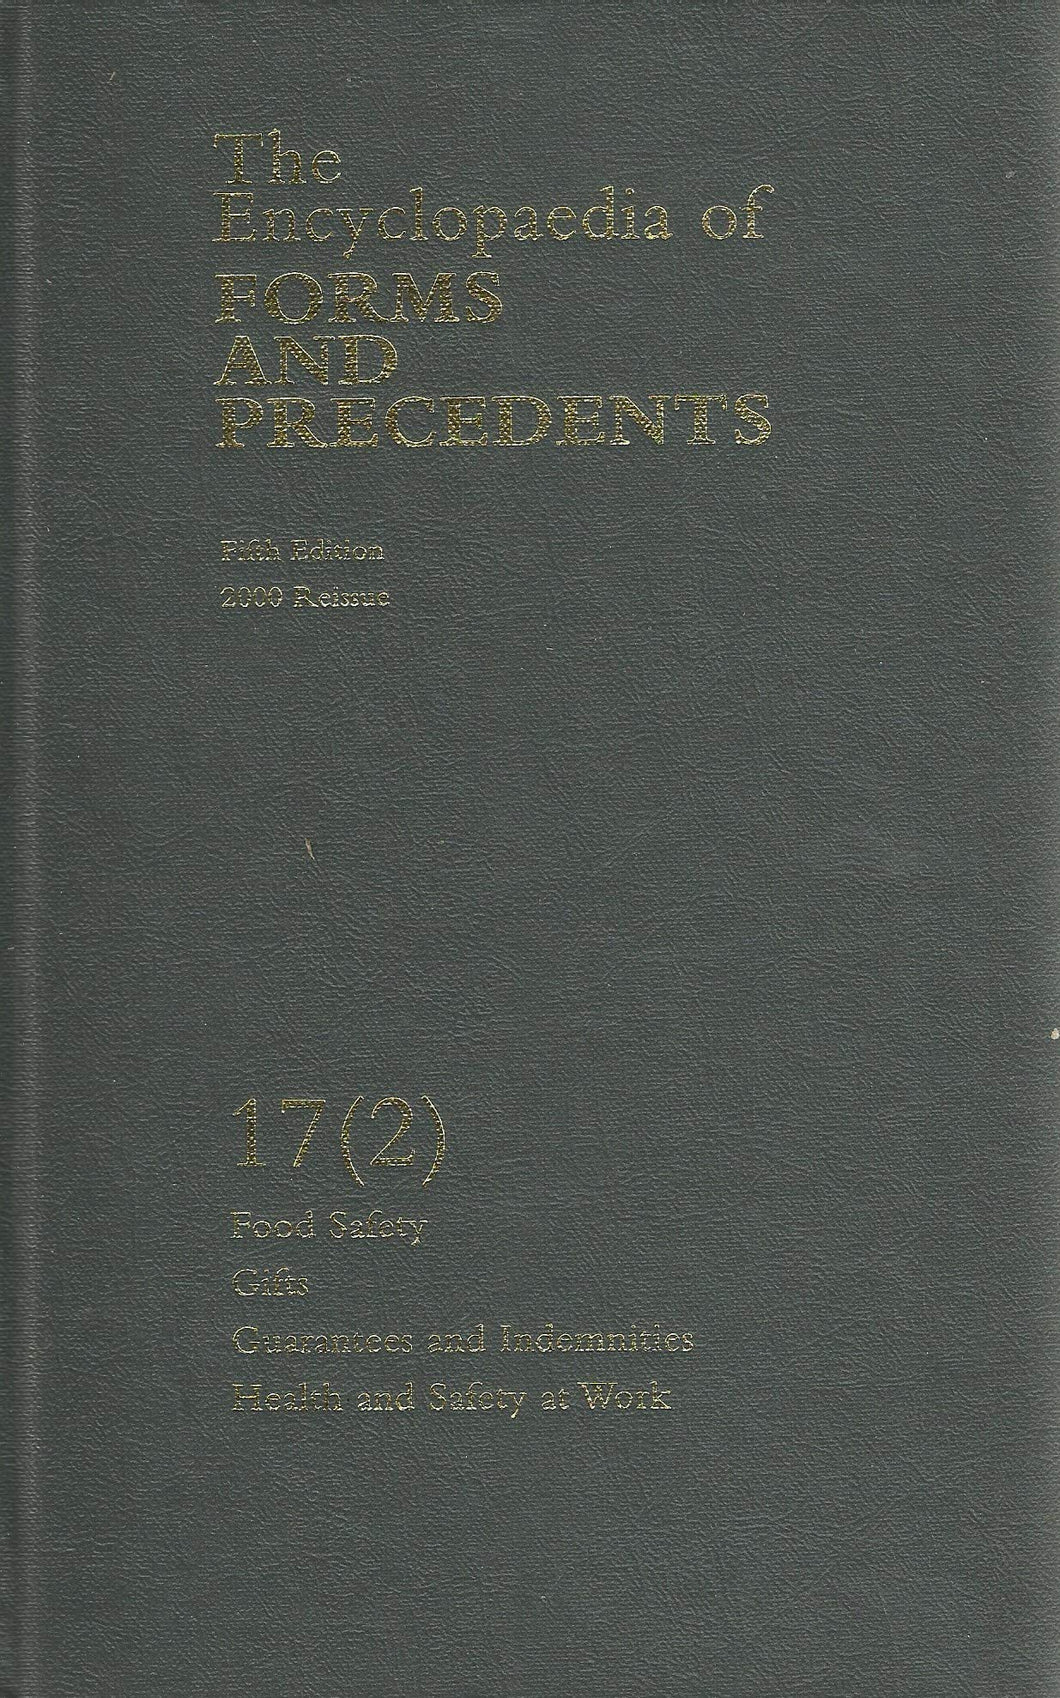 The Encyclopedia of Forms and Precendents, Volume 17 (2): Food Safety, Gifts, Guarantees and Indemnities, Health and Safety at Work